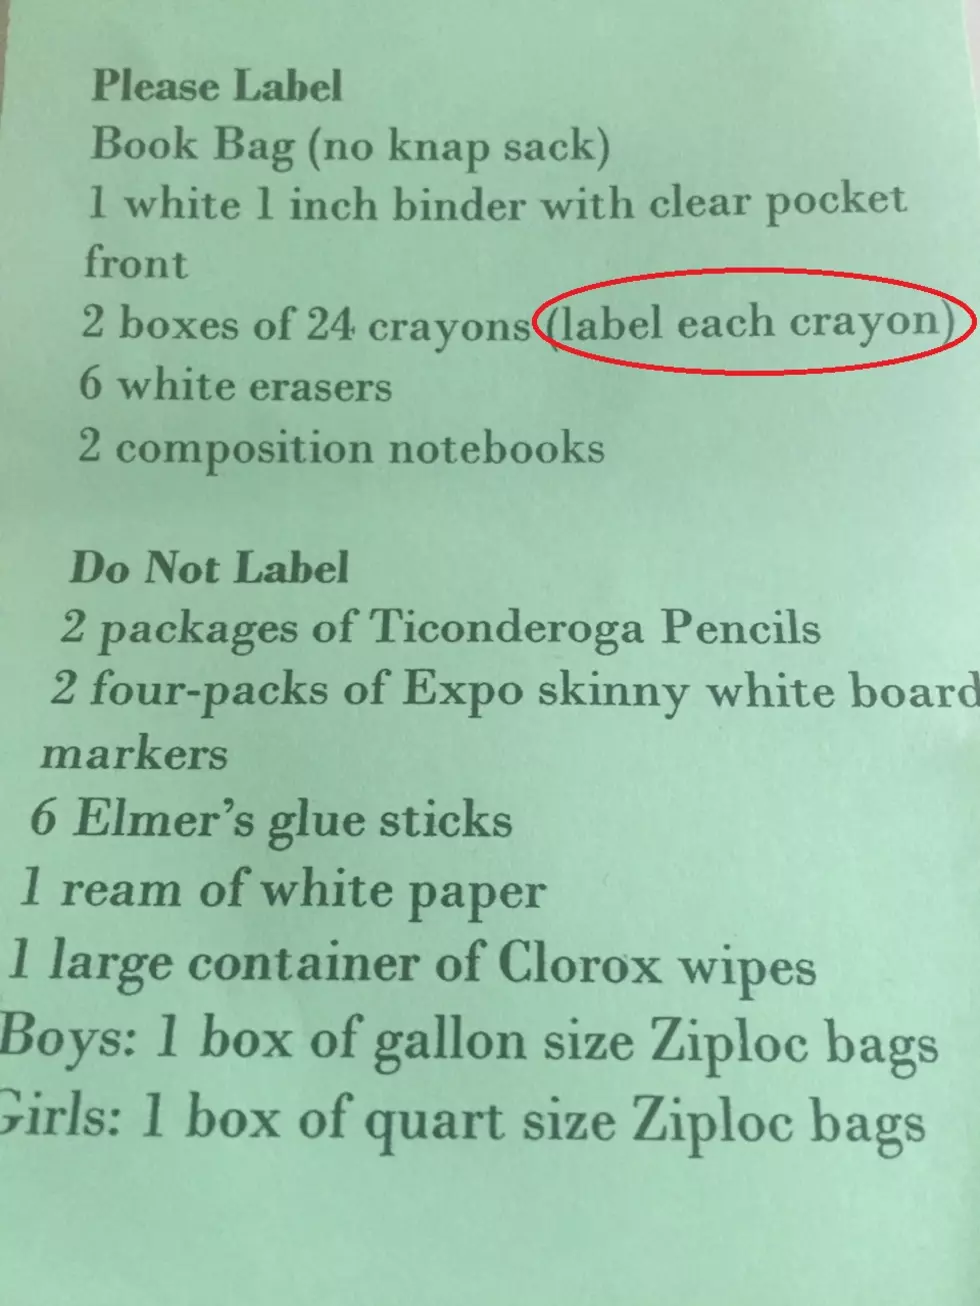 This Quincy School Supply List Includes A Bizarre Request